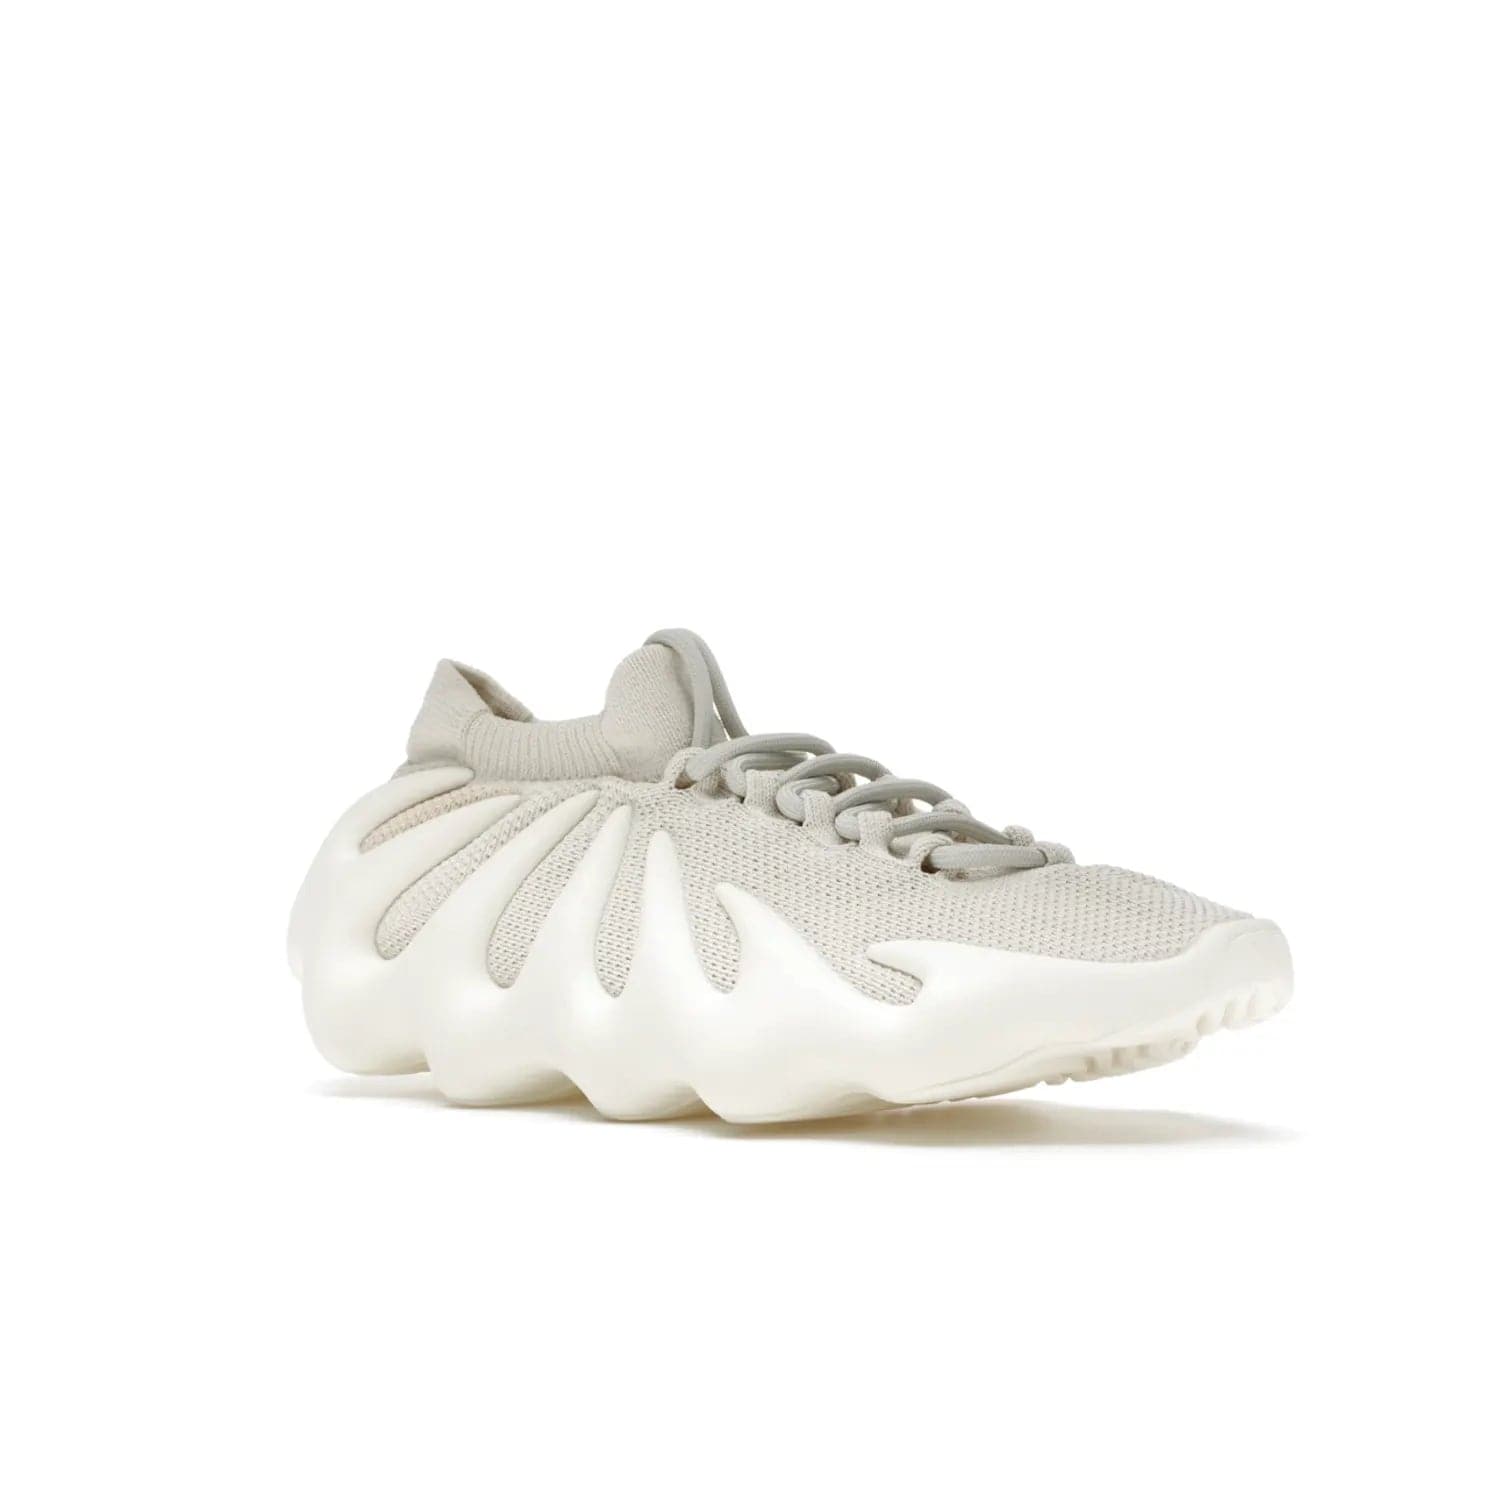 adidas Yeezy 450 Cloud White - Image 5 - Only at www.BallersClubKickz.com - Experience the future with the adidas Yeezy 450 Cloud White. A two-piece design featuring an extreme foam sole and mesh upper, this silhouette is expected to release in March 2021. Get your hands on this striking Cloud White/Cloud White colorway and stand out in the crowd.